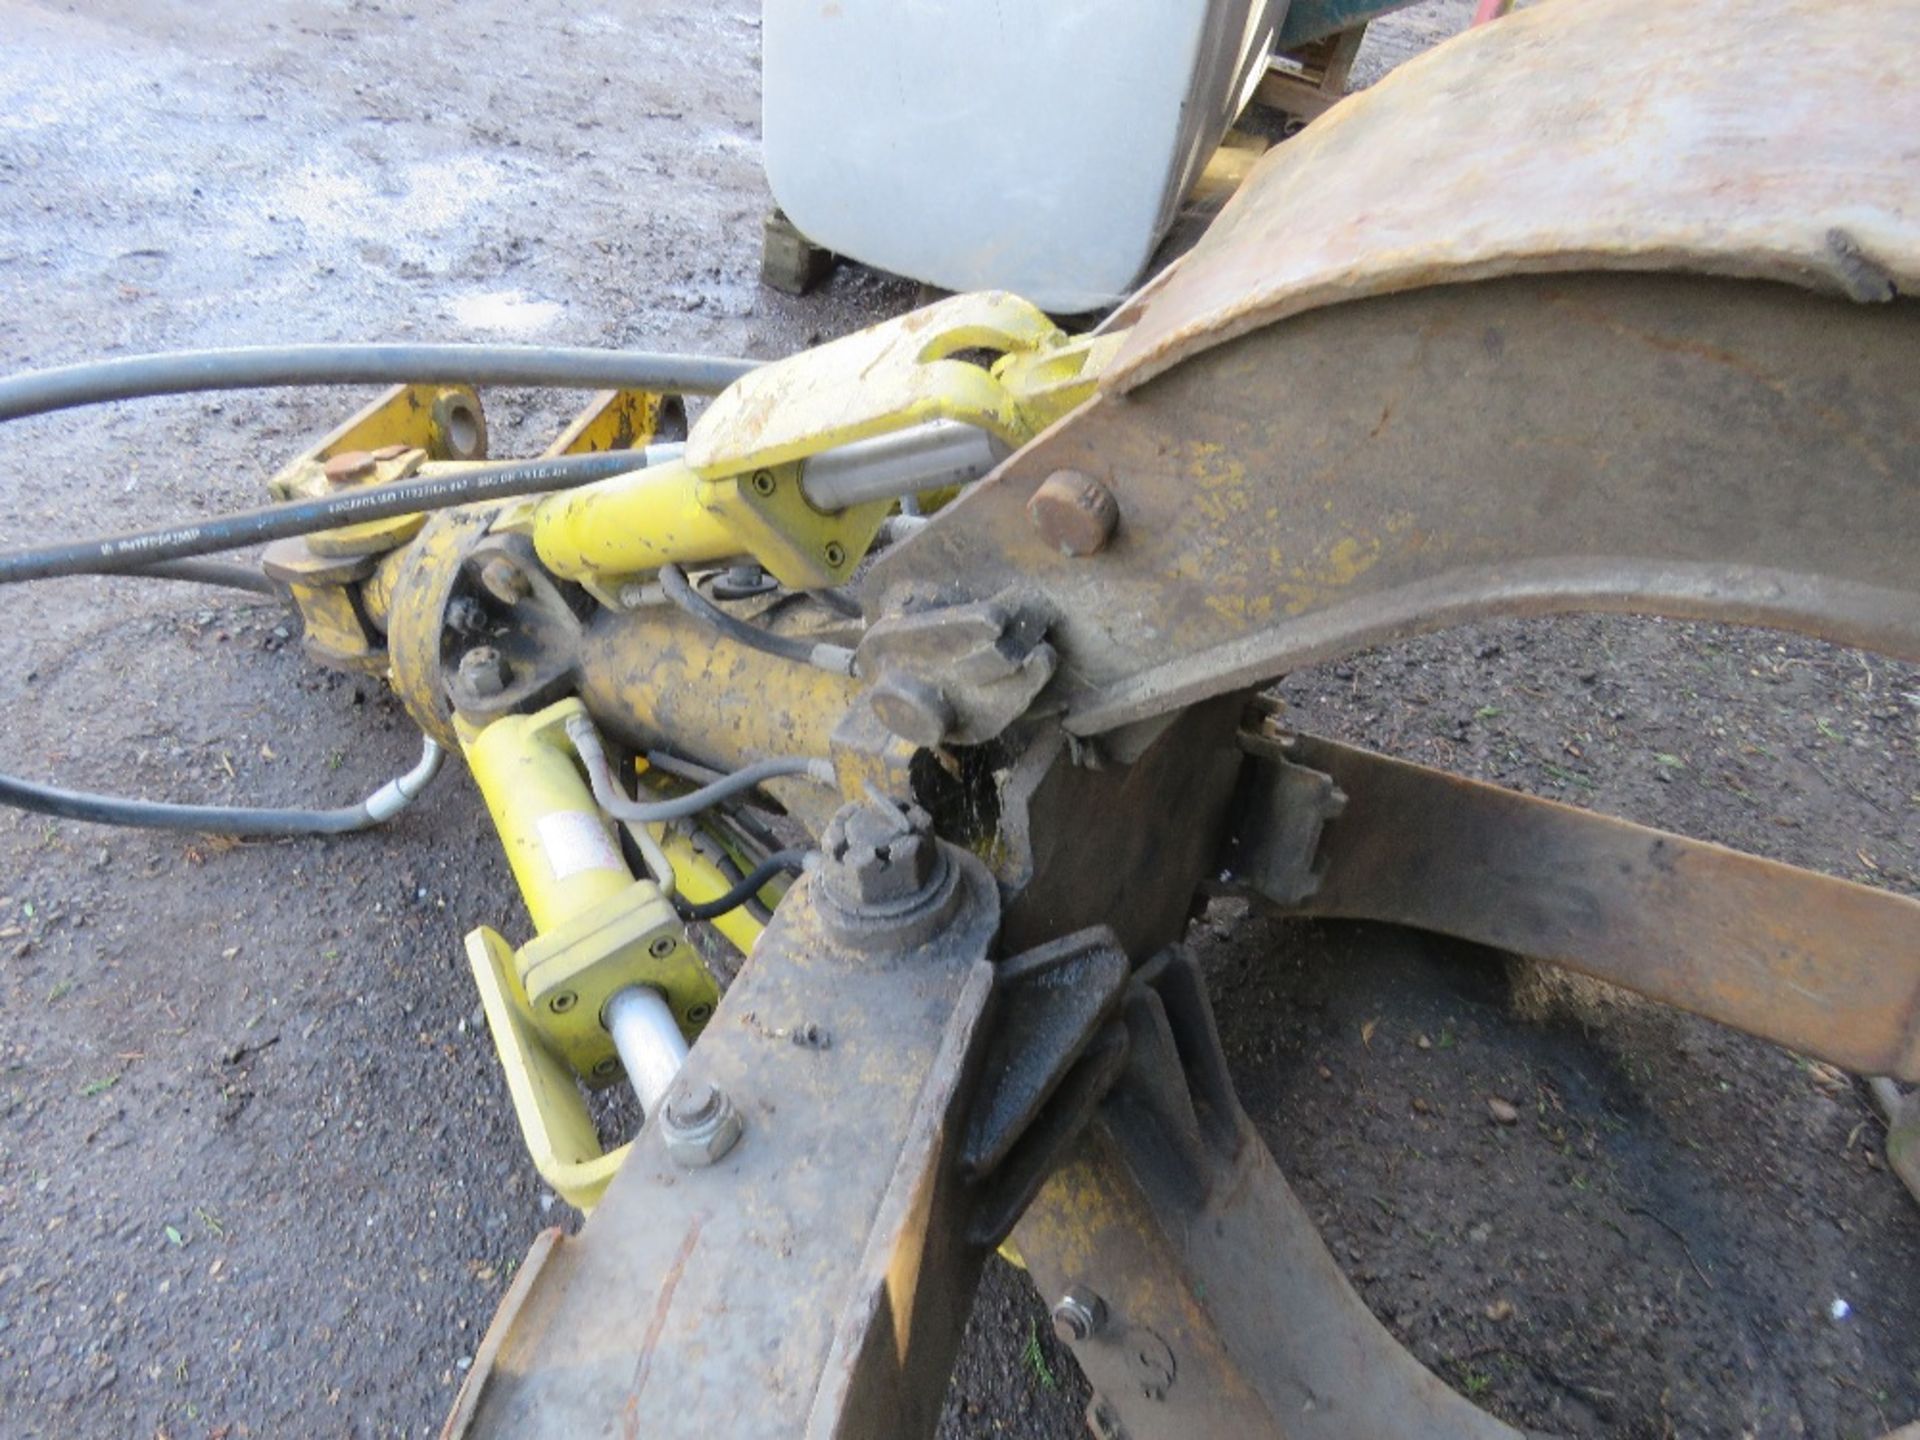 EXCAVATOR MOUNTED 5 TINE SCRAP GRAB WITH ROTATOR ON 65MM PINS, RAMS DONE LITTLE WORK SINCE REFURBISH - Image 4 of 6